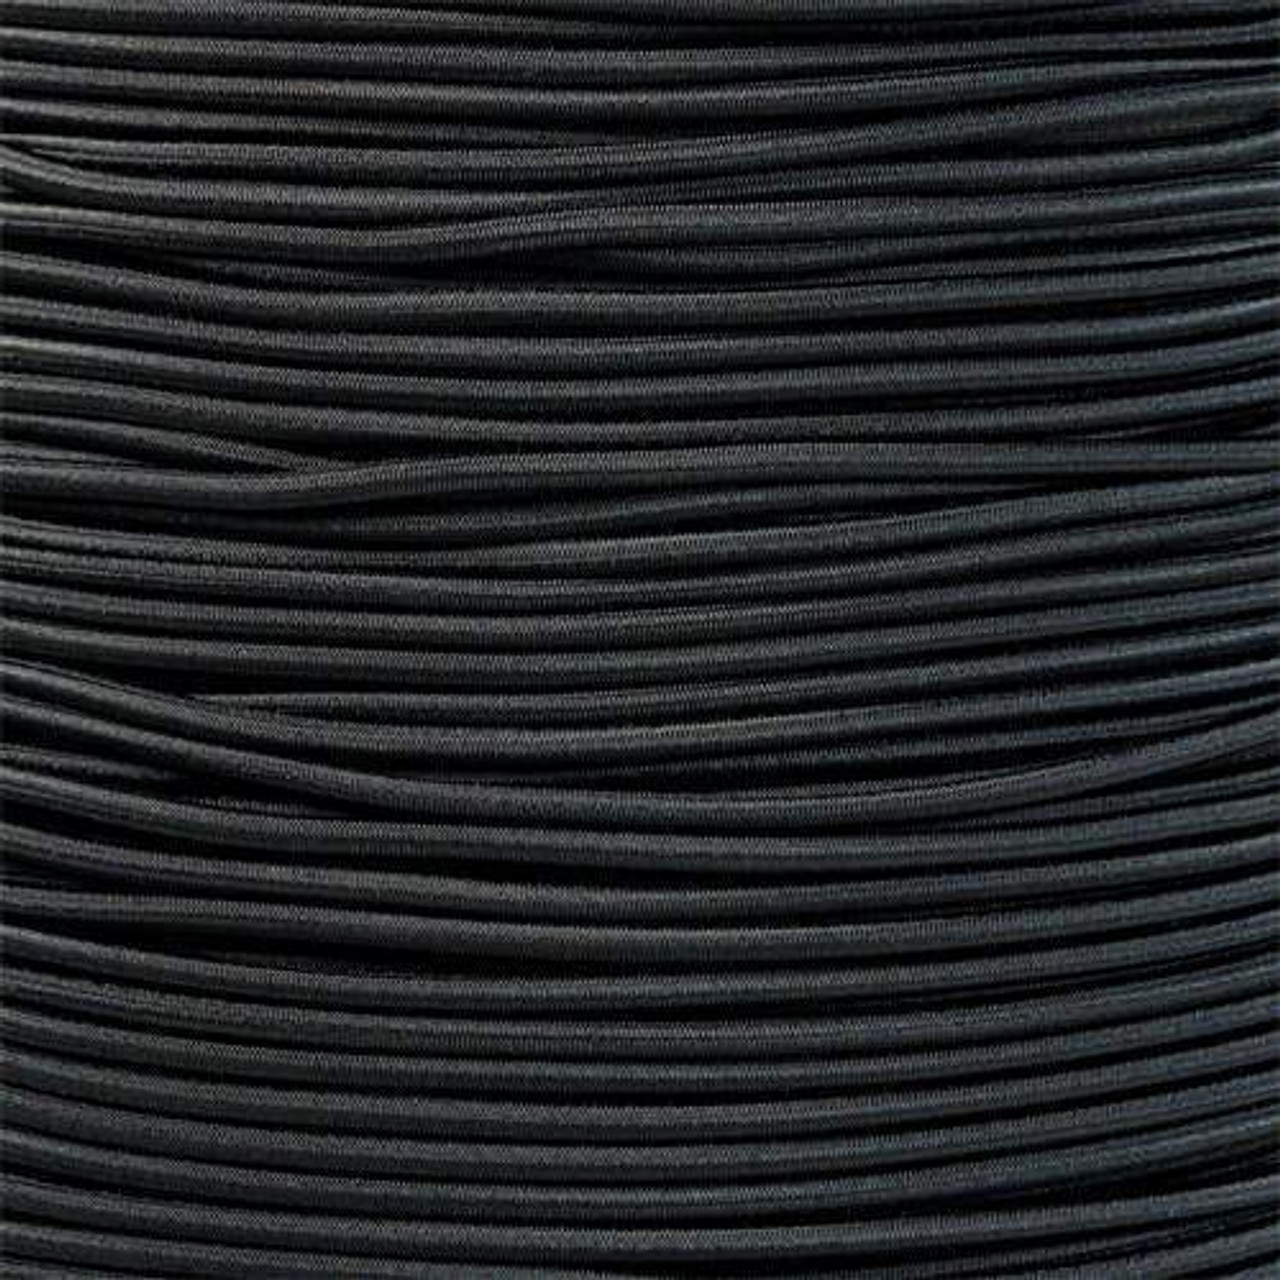 Black Elastic Bungee Cable Paracord Planet 1/8" x 25’ US Made Shock Cord 